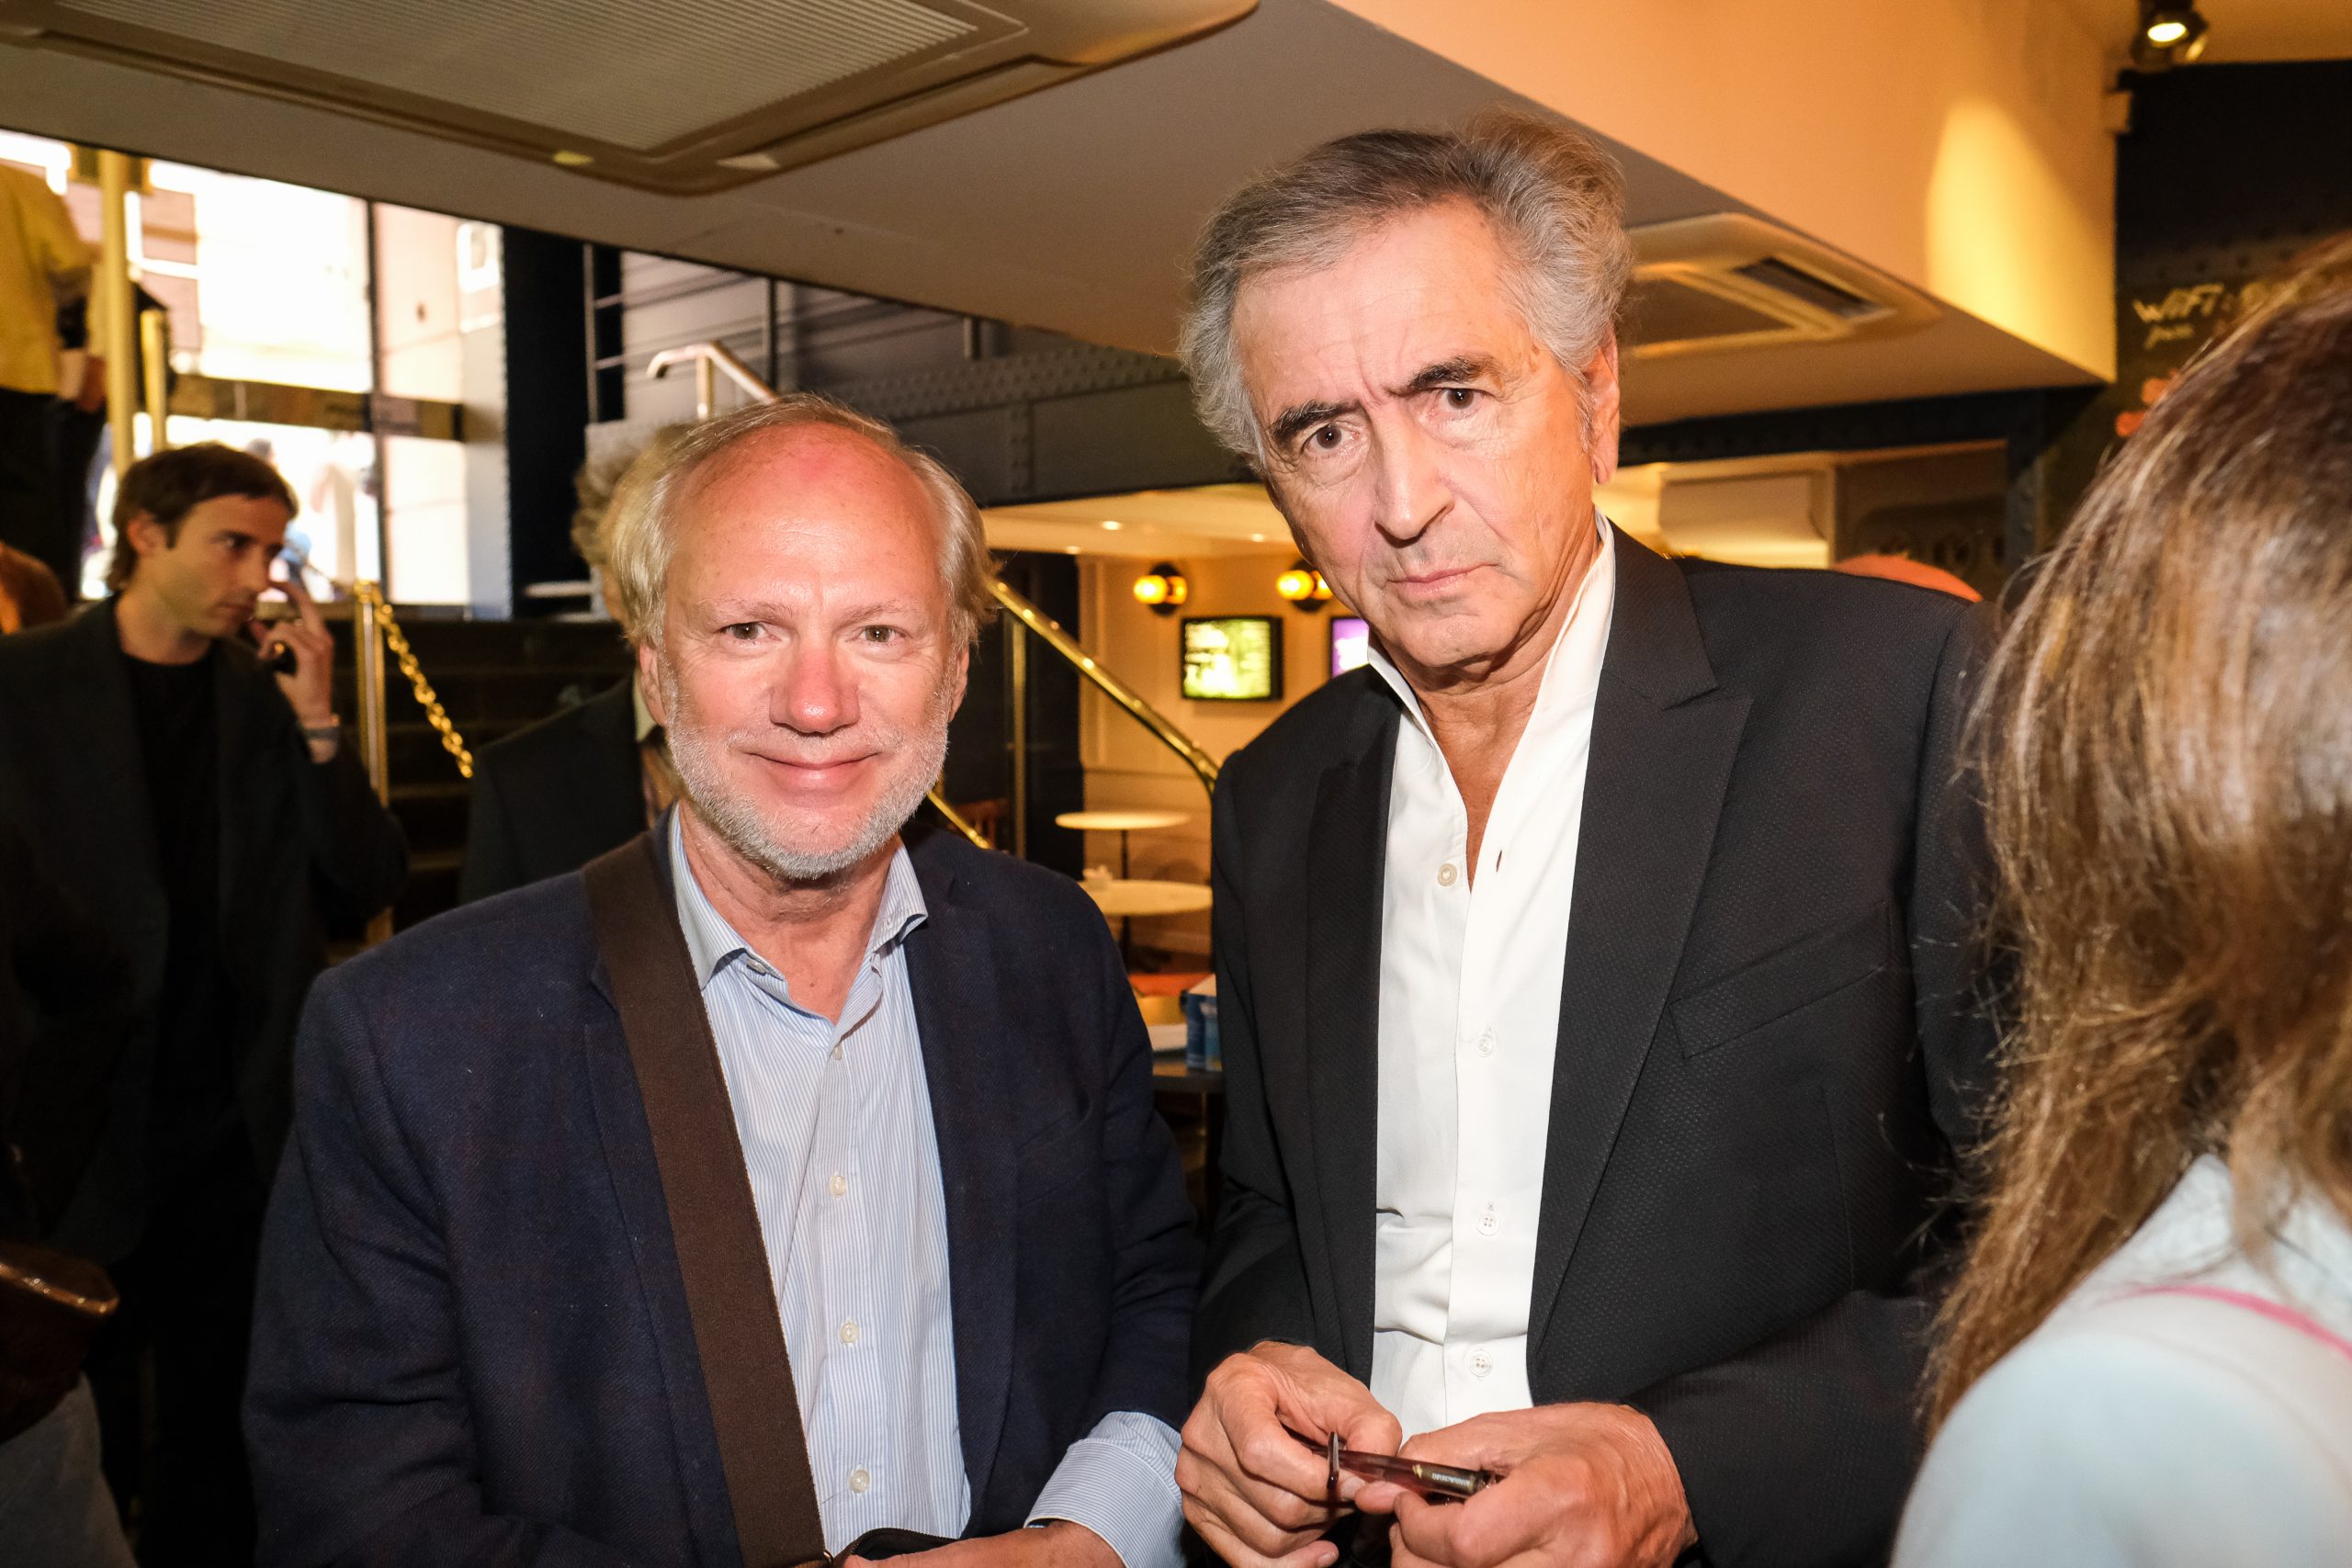 Bernard-Henri Lévy and Laurent Joffrin, during the preview of BHL's film "Why Ukraine", at the Cinema Le Balzac in Paris.